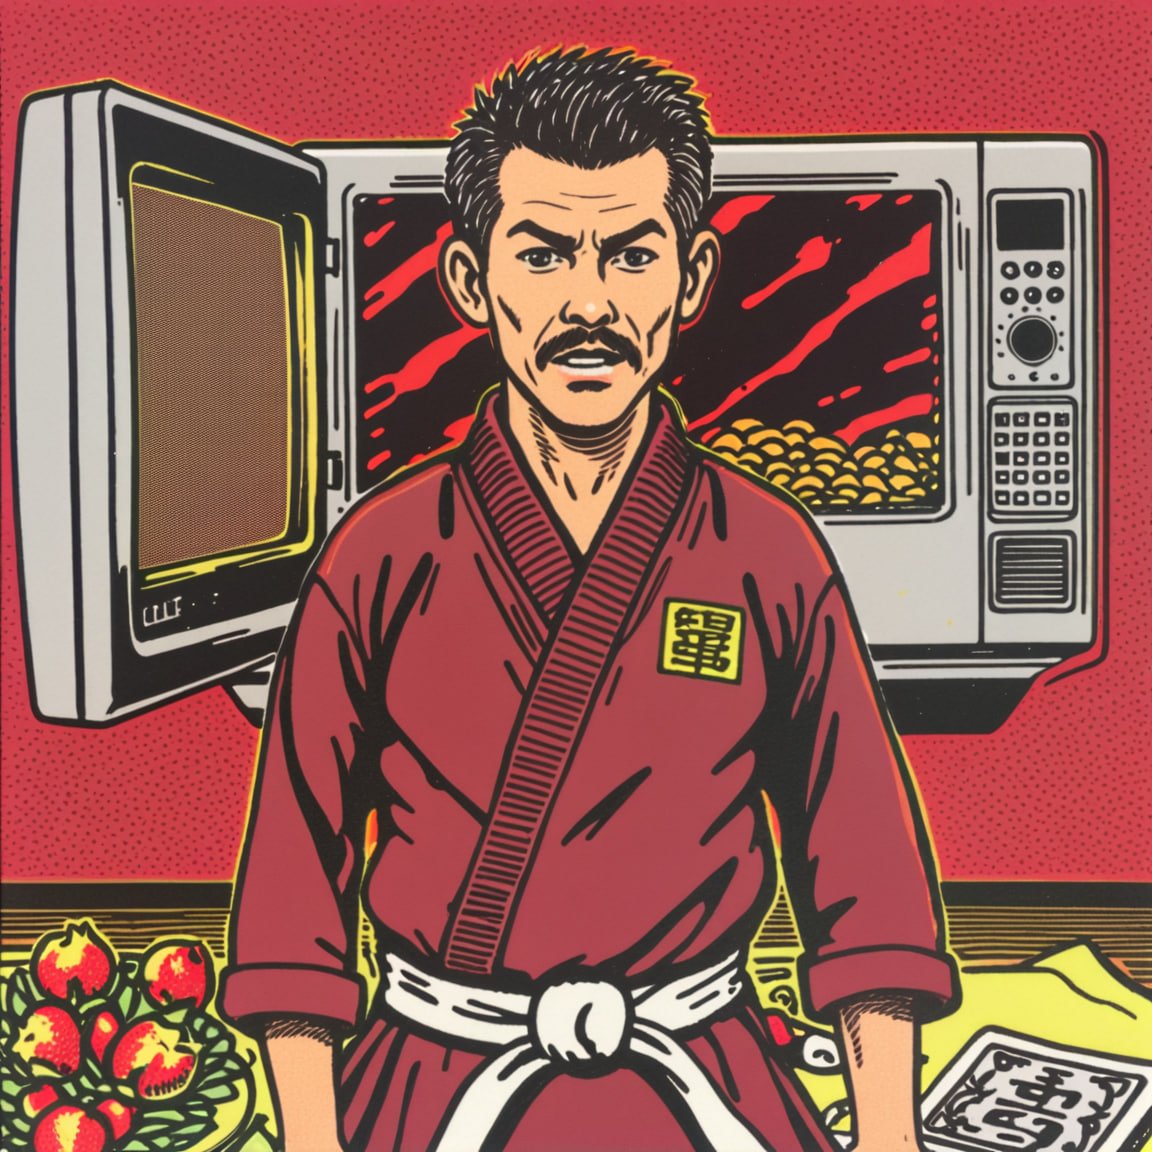 Some men just want to watch the world spin around on a little glass dish $KARATE #UpOnlyGaming #KarateDeMayo